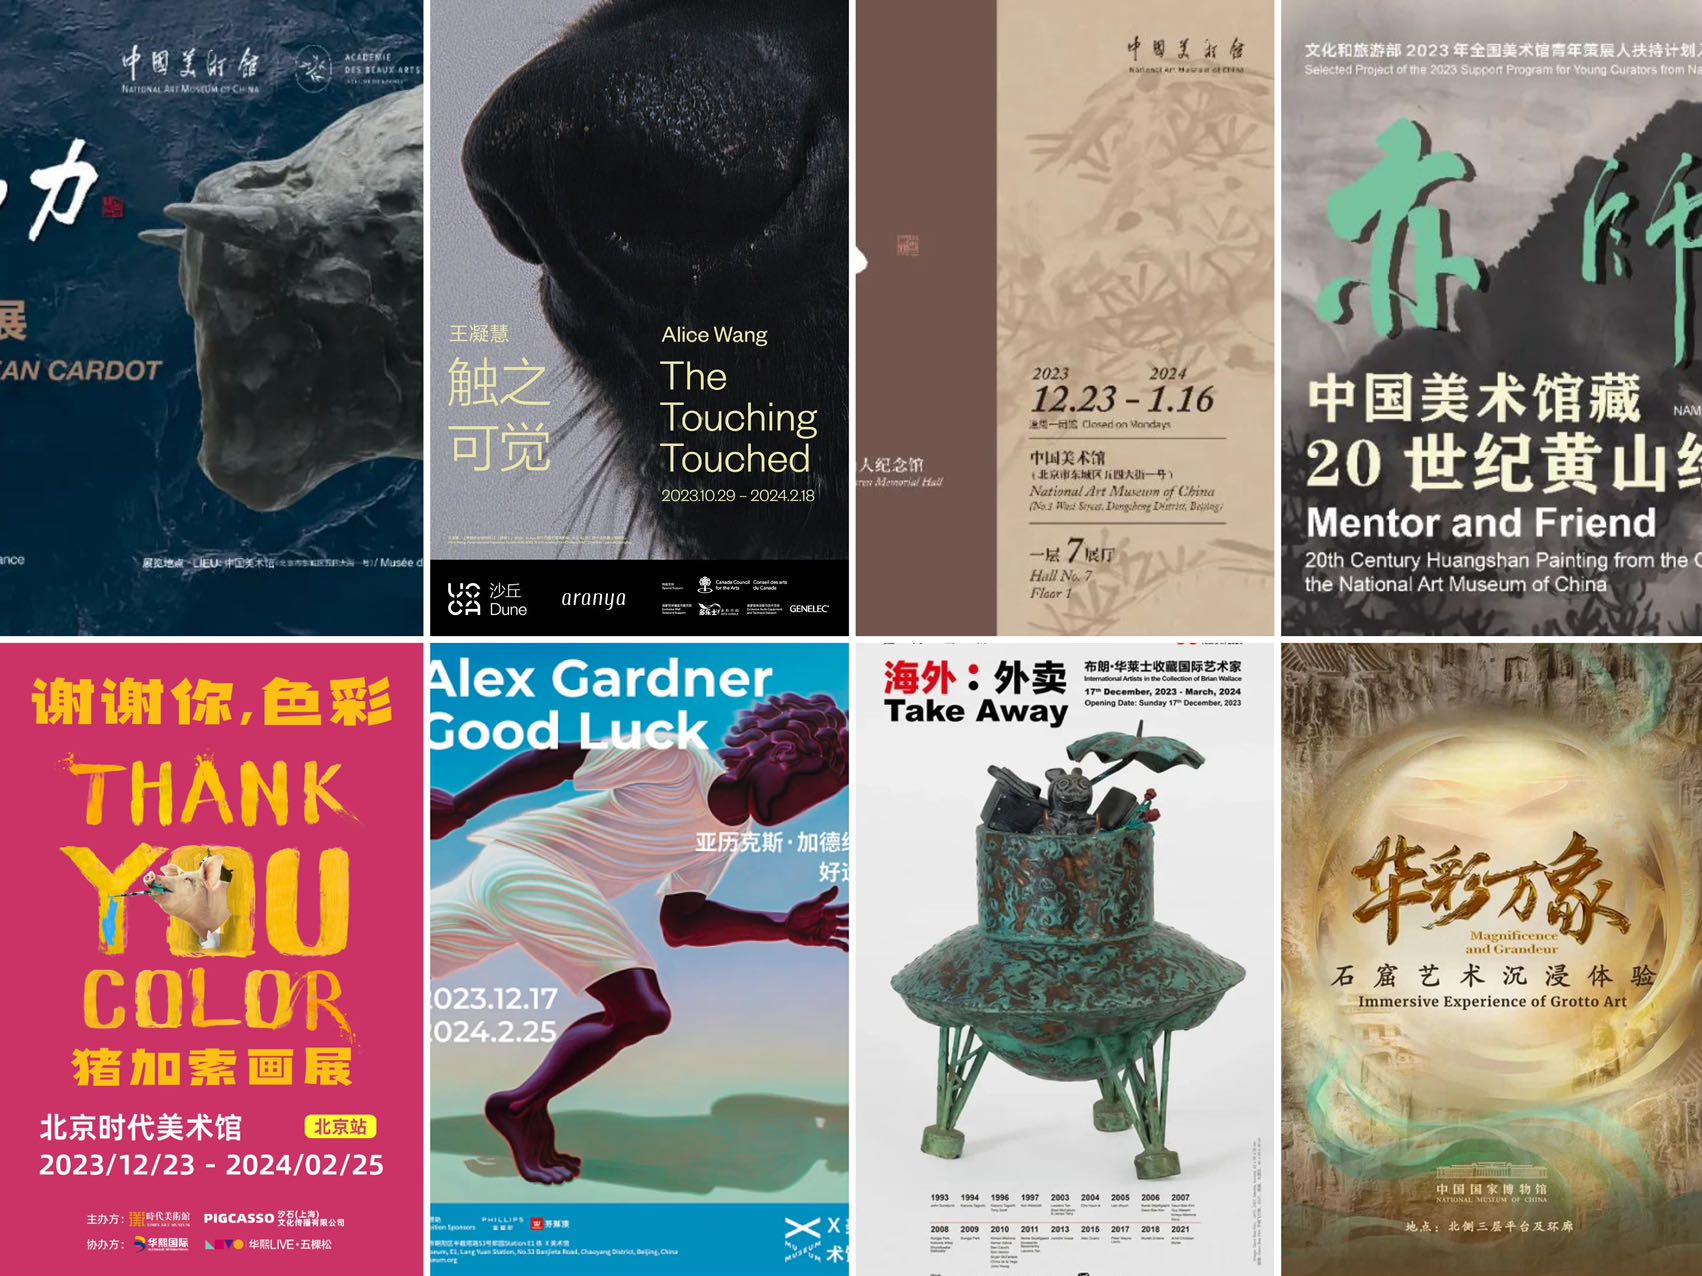 16 Amazing Art Shows This January in Beijing